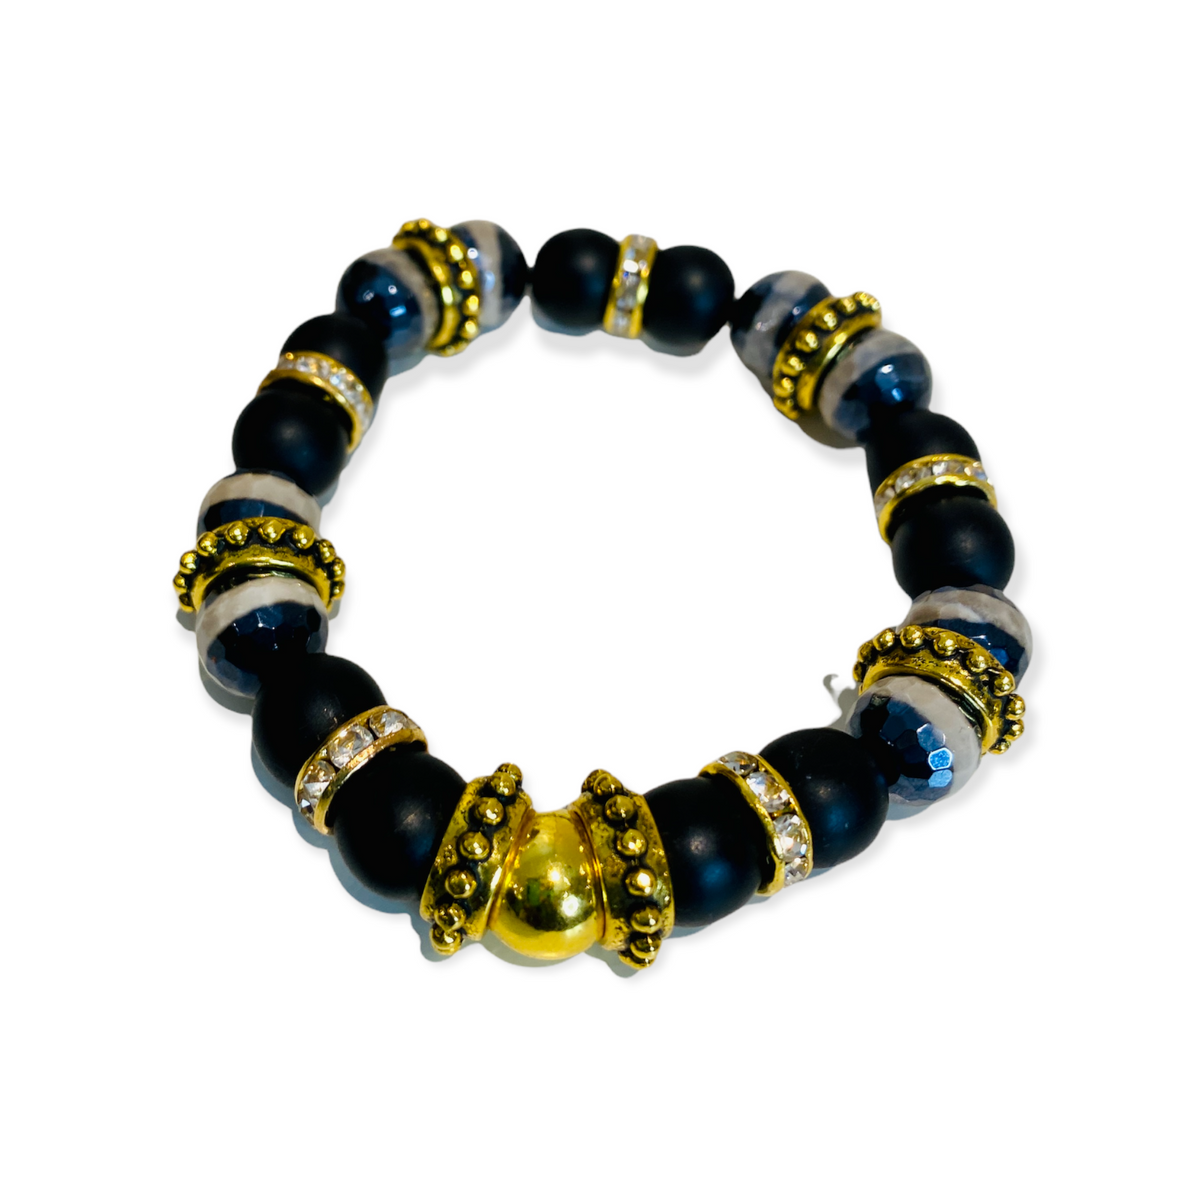 Black Matted & Plated Striped Agate Luxury Lifestyle Bracelet